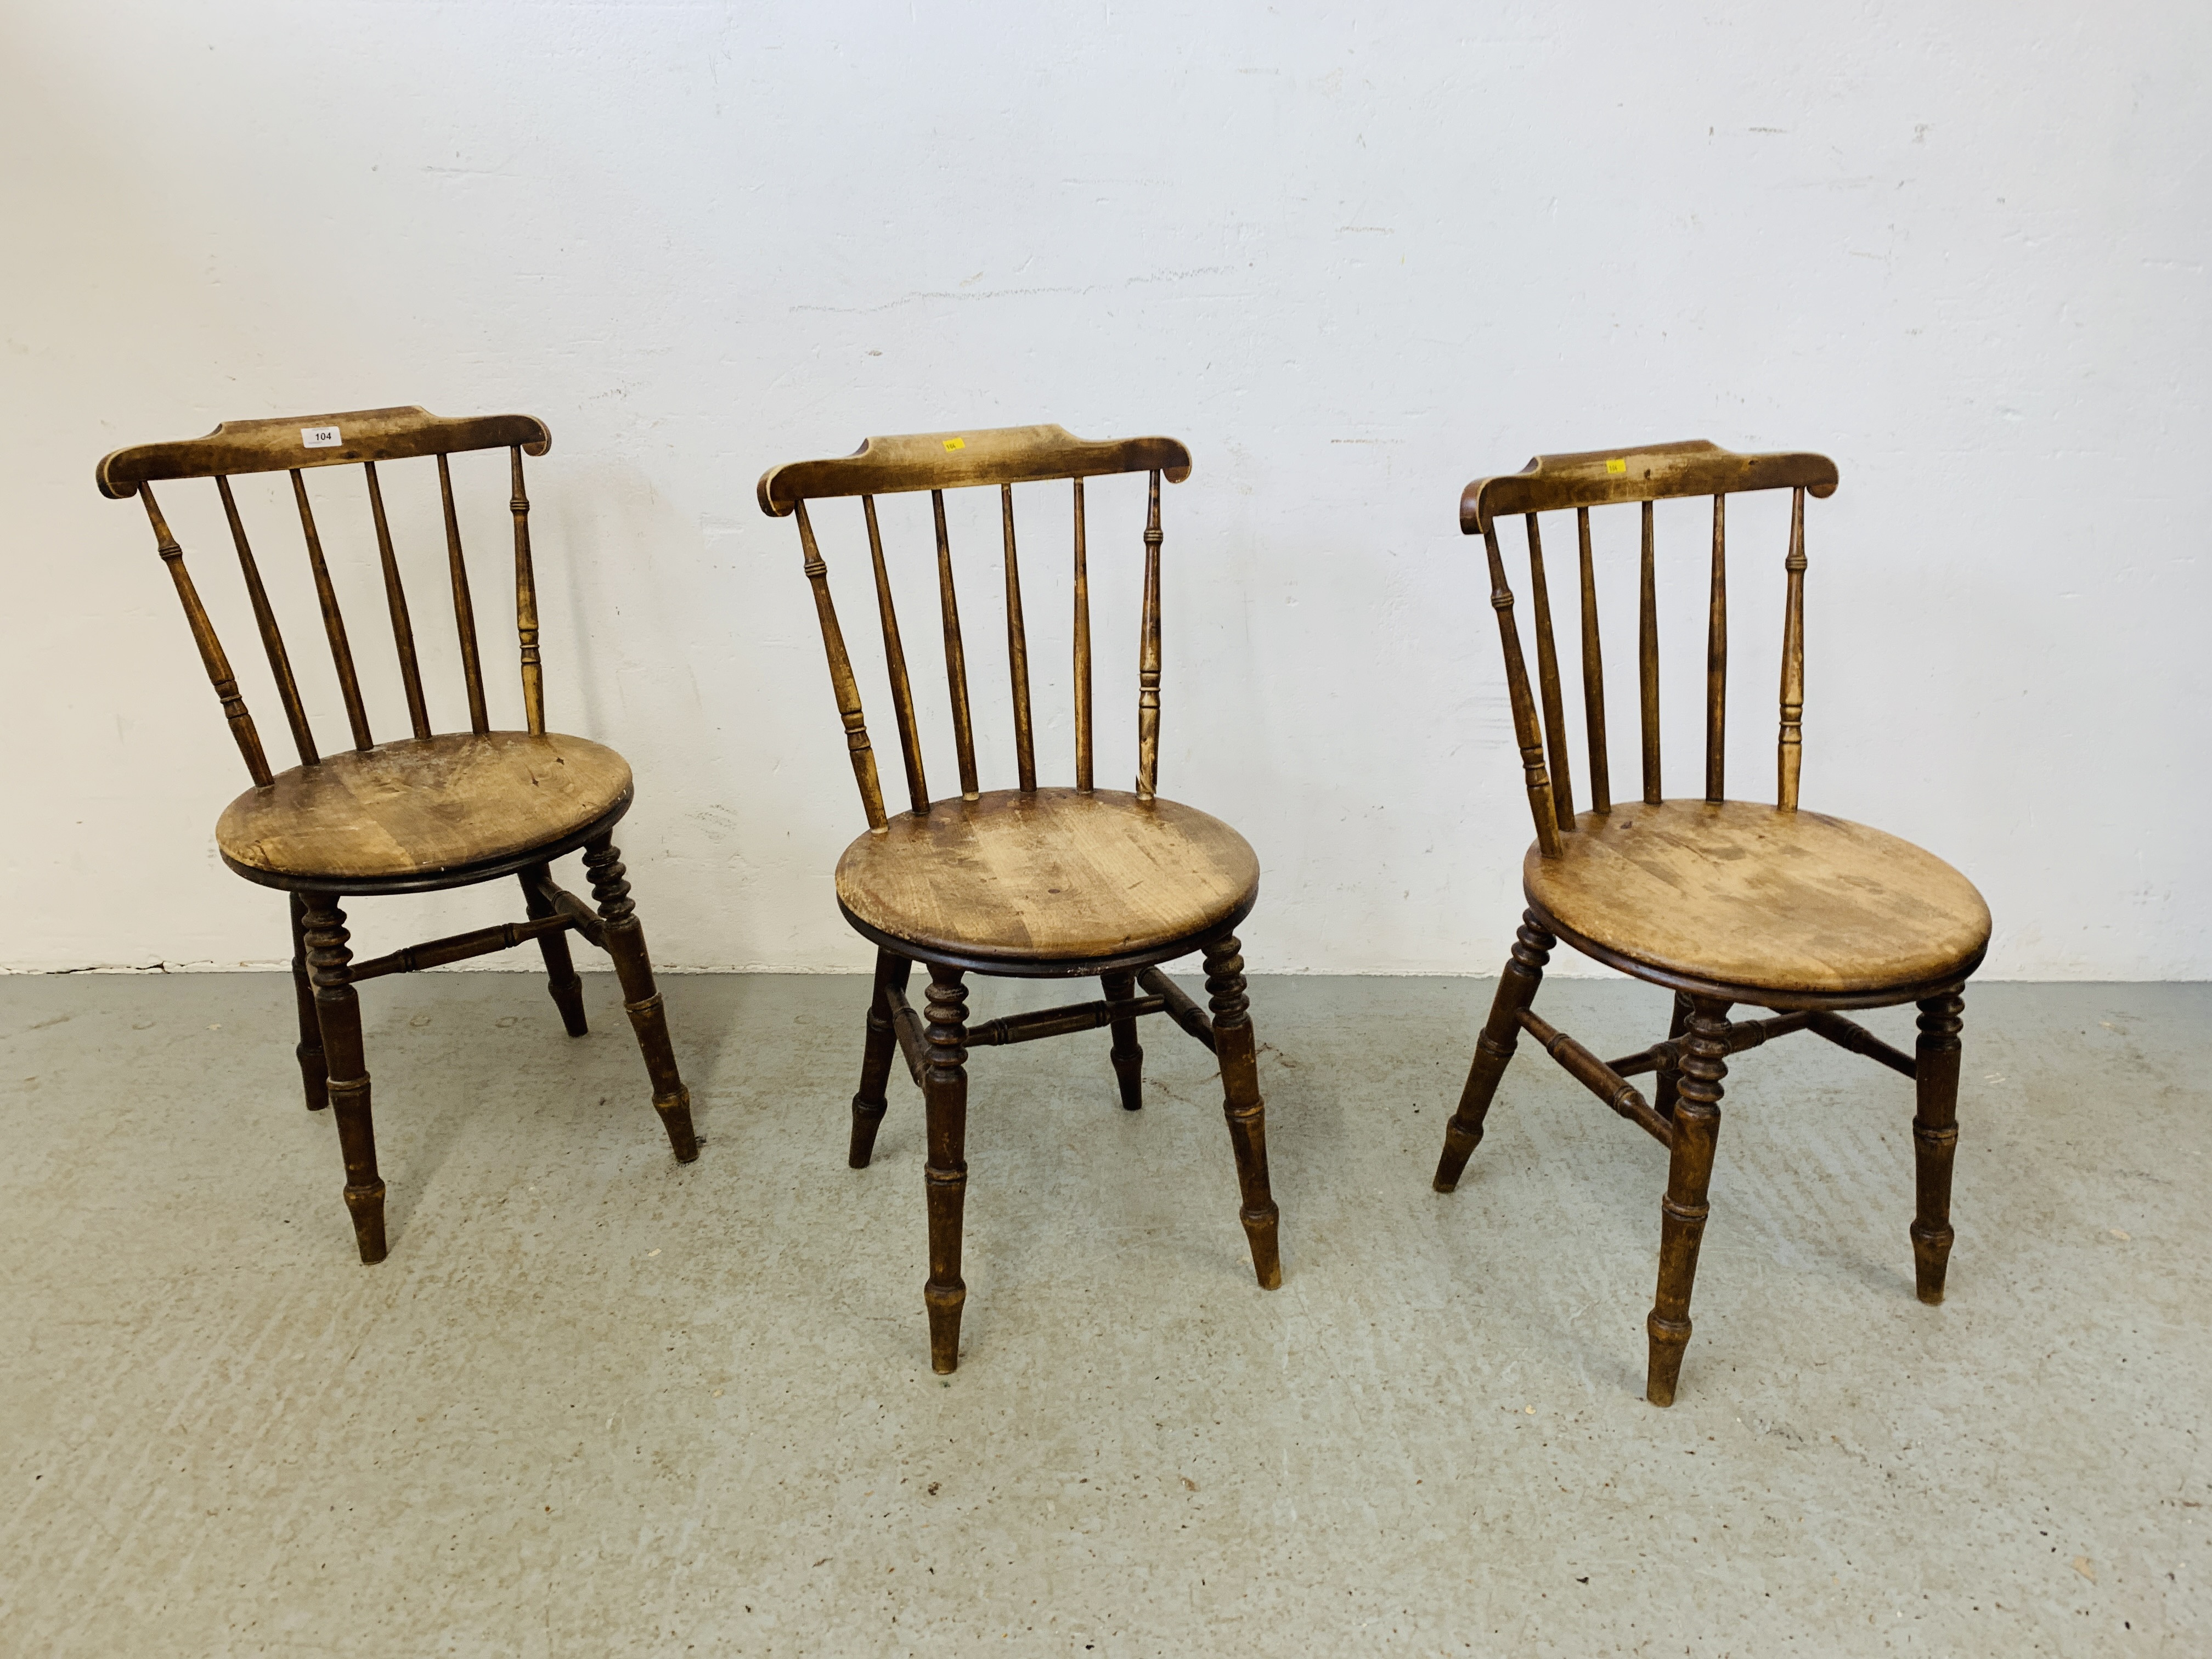 3 CHARACTER PENNY SEAT STICKBACK CHAIRS WITH TURNED LEGS A/F CONDITION